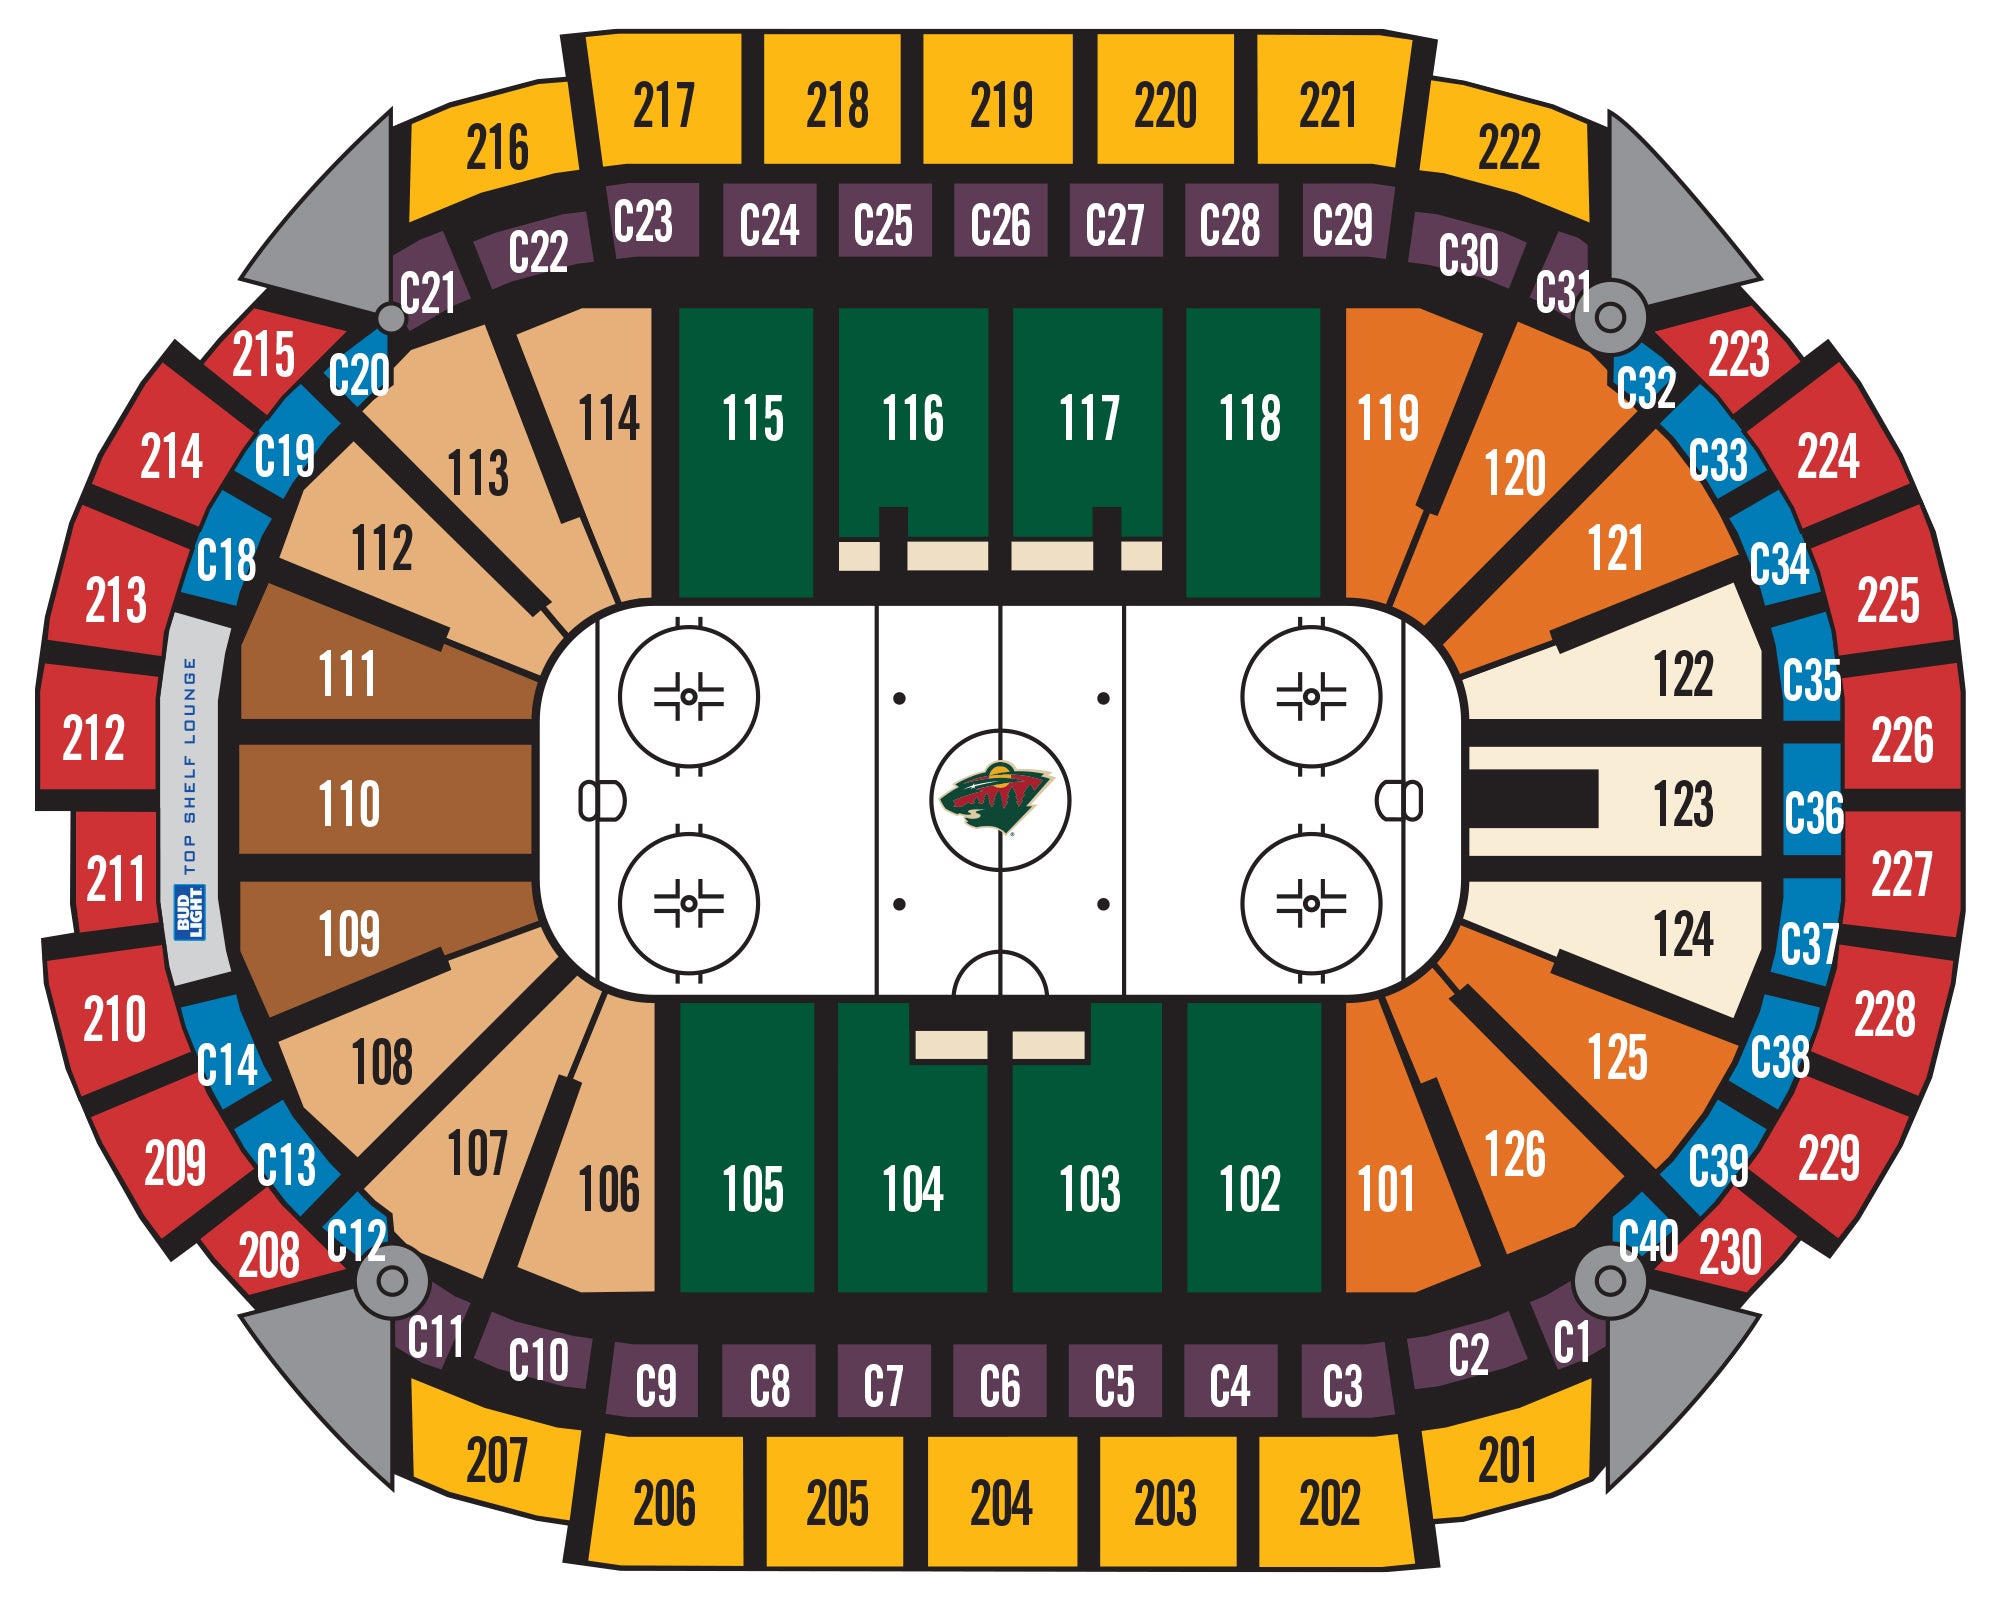 Xcel Energy Center, section C4, home of Minnesota Wild, page 1